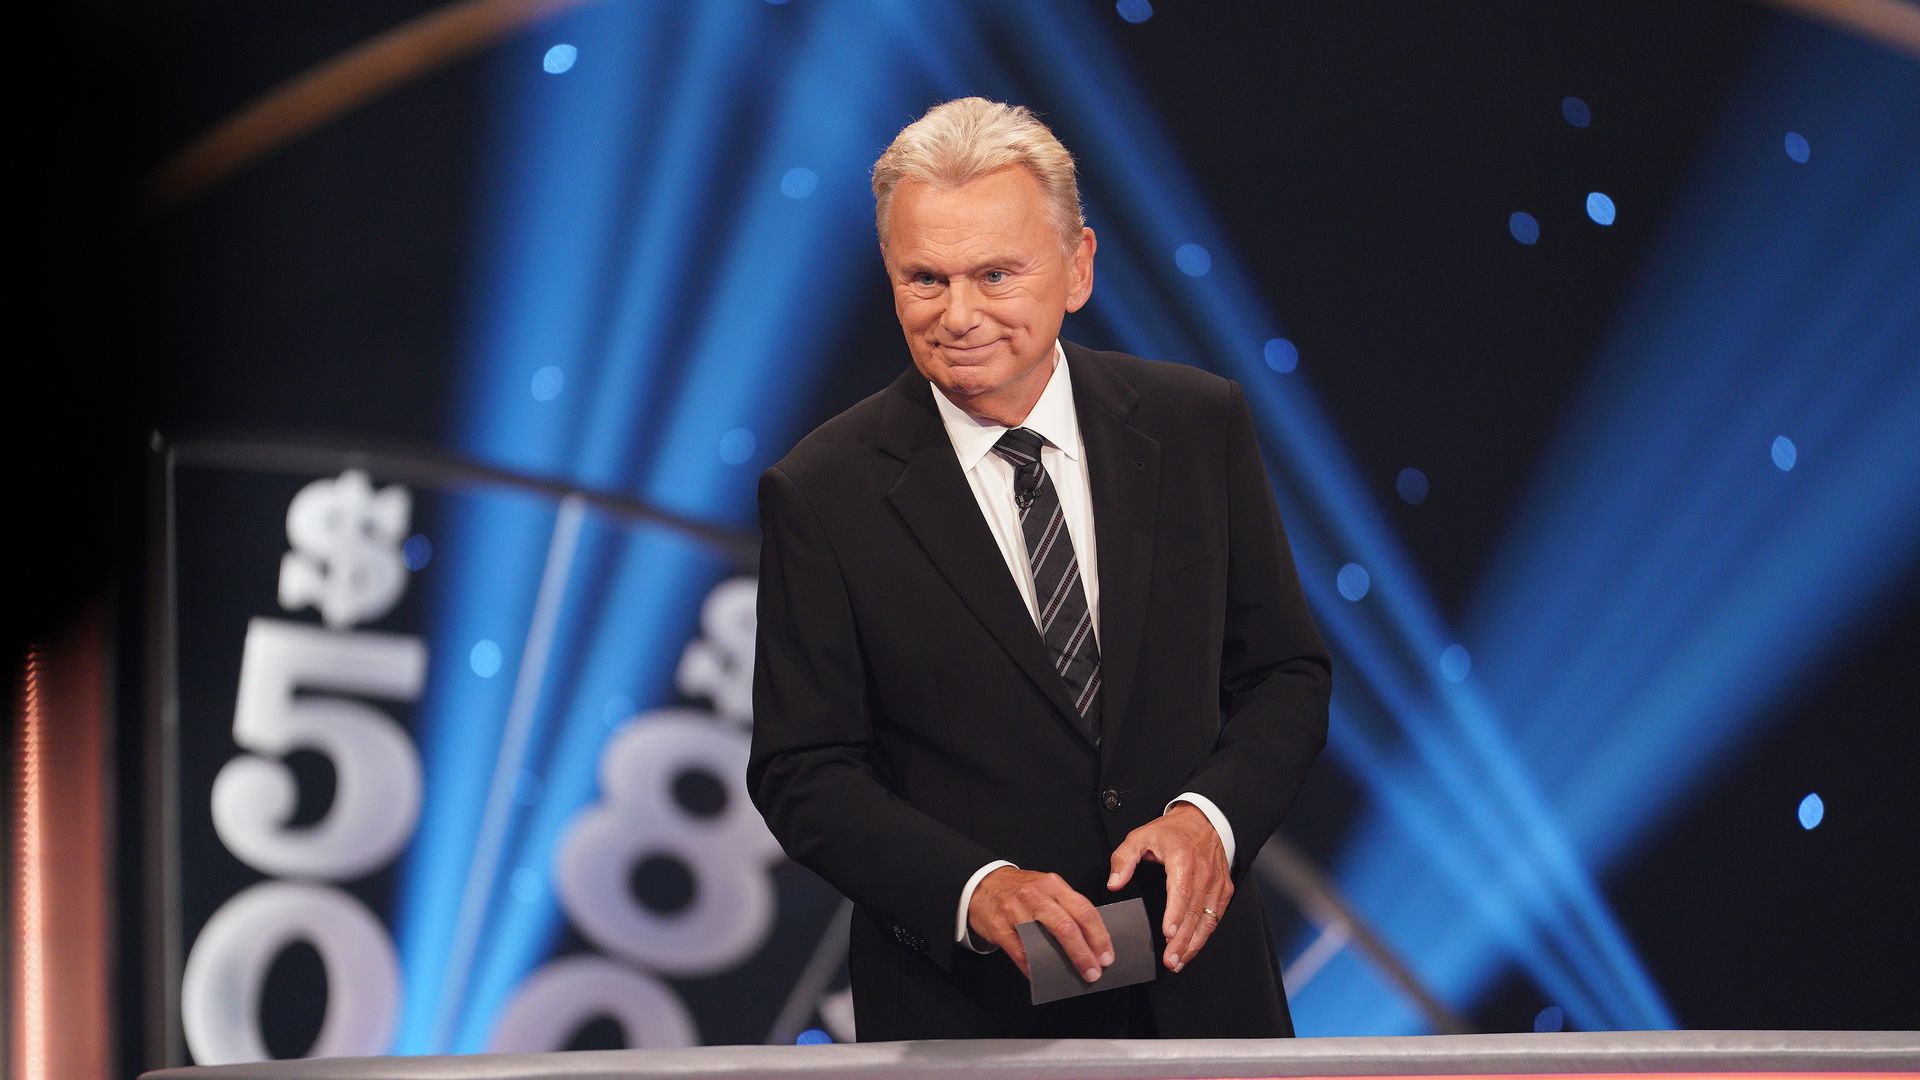 PAT SAJAK on Celebrity Wheel of Fortune